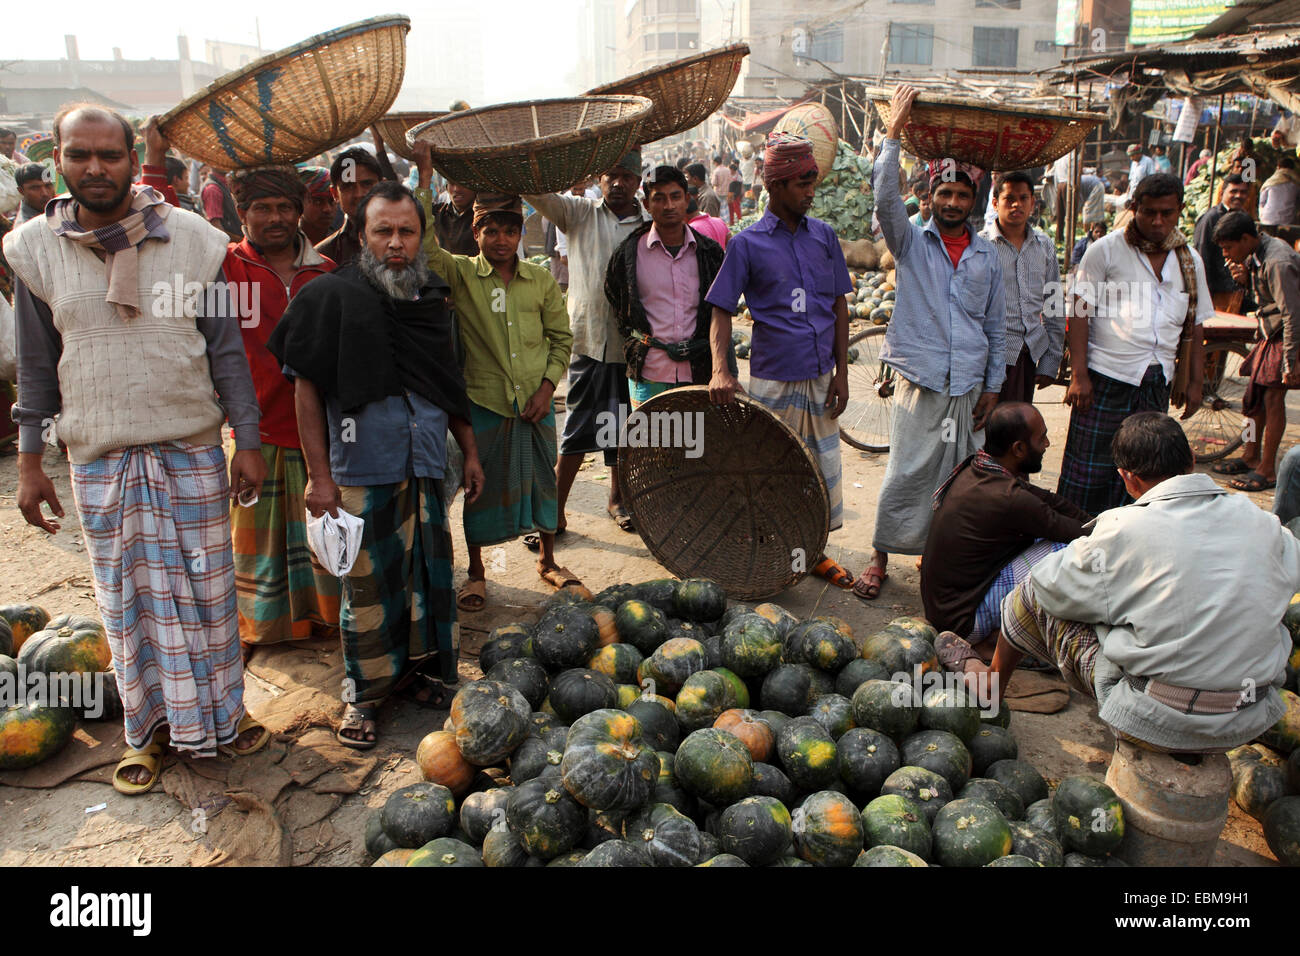 Men at the market at Gulshan in Dhaka, Bangladesh. Fruit and vegetables are sold wholesale at the market and carried by porters. Stock Photo